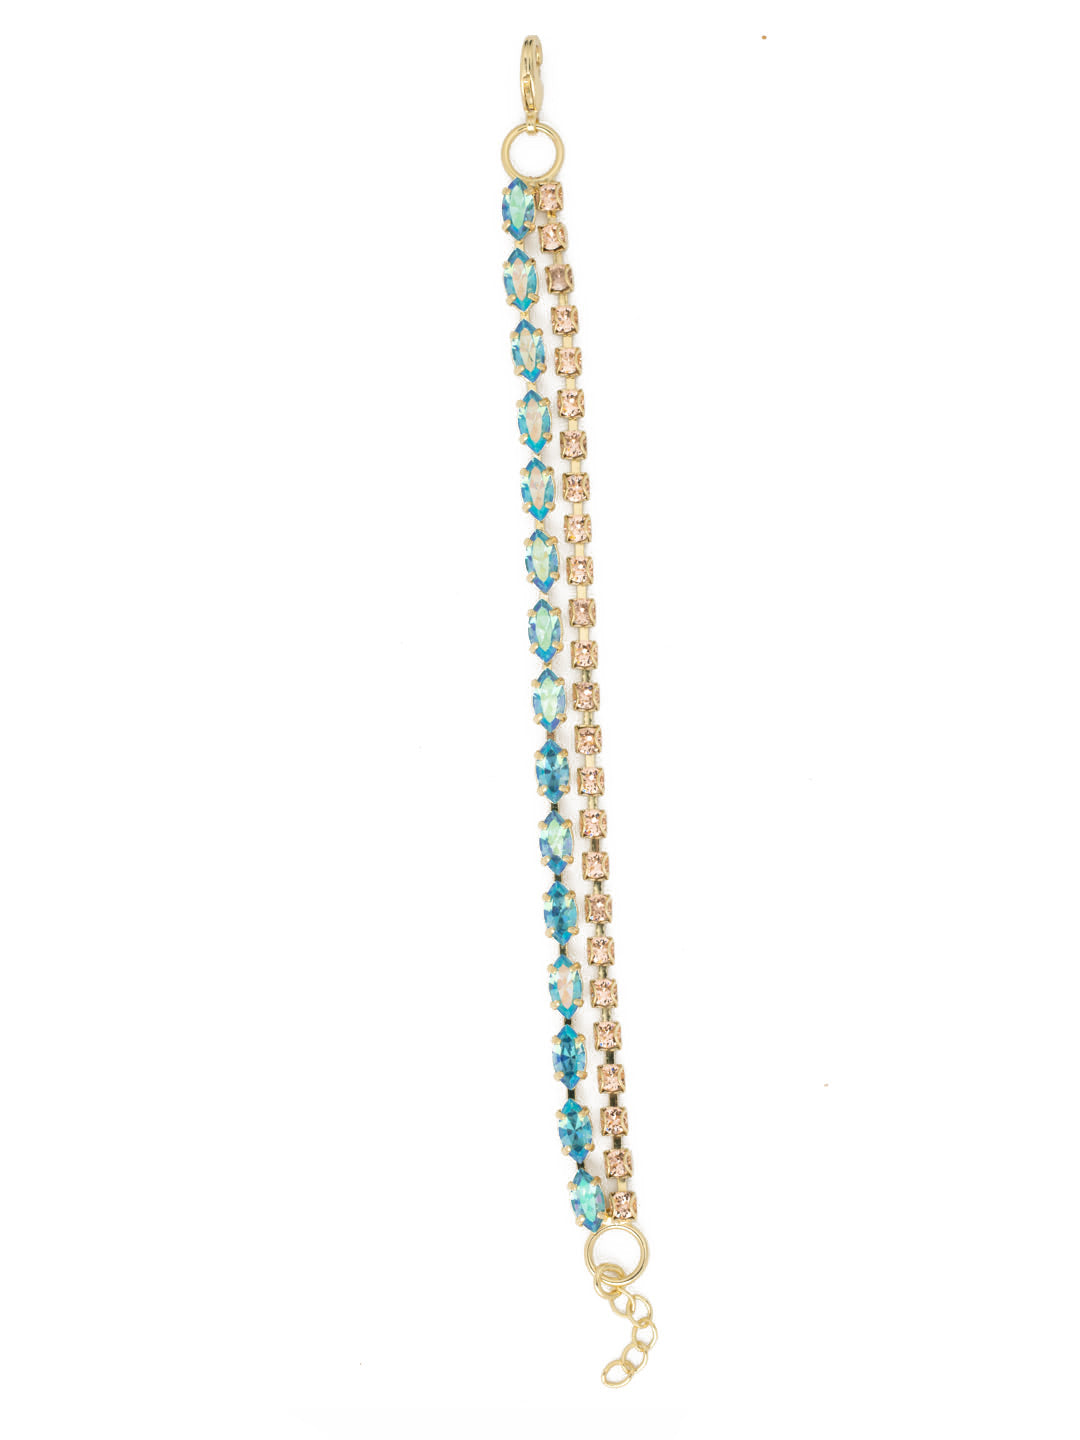 Clarissa Layered Tennis Bracelet - BFL6BGPRT - <p>The Clarissa Layered Tennis Bracelet features a rhinestone chain and navette crystal chain layered on an adjustable chain, secured with a lobster claw clasp. From Sorrelli's Portofino collection in our Bright Gold-tone finish.</p>